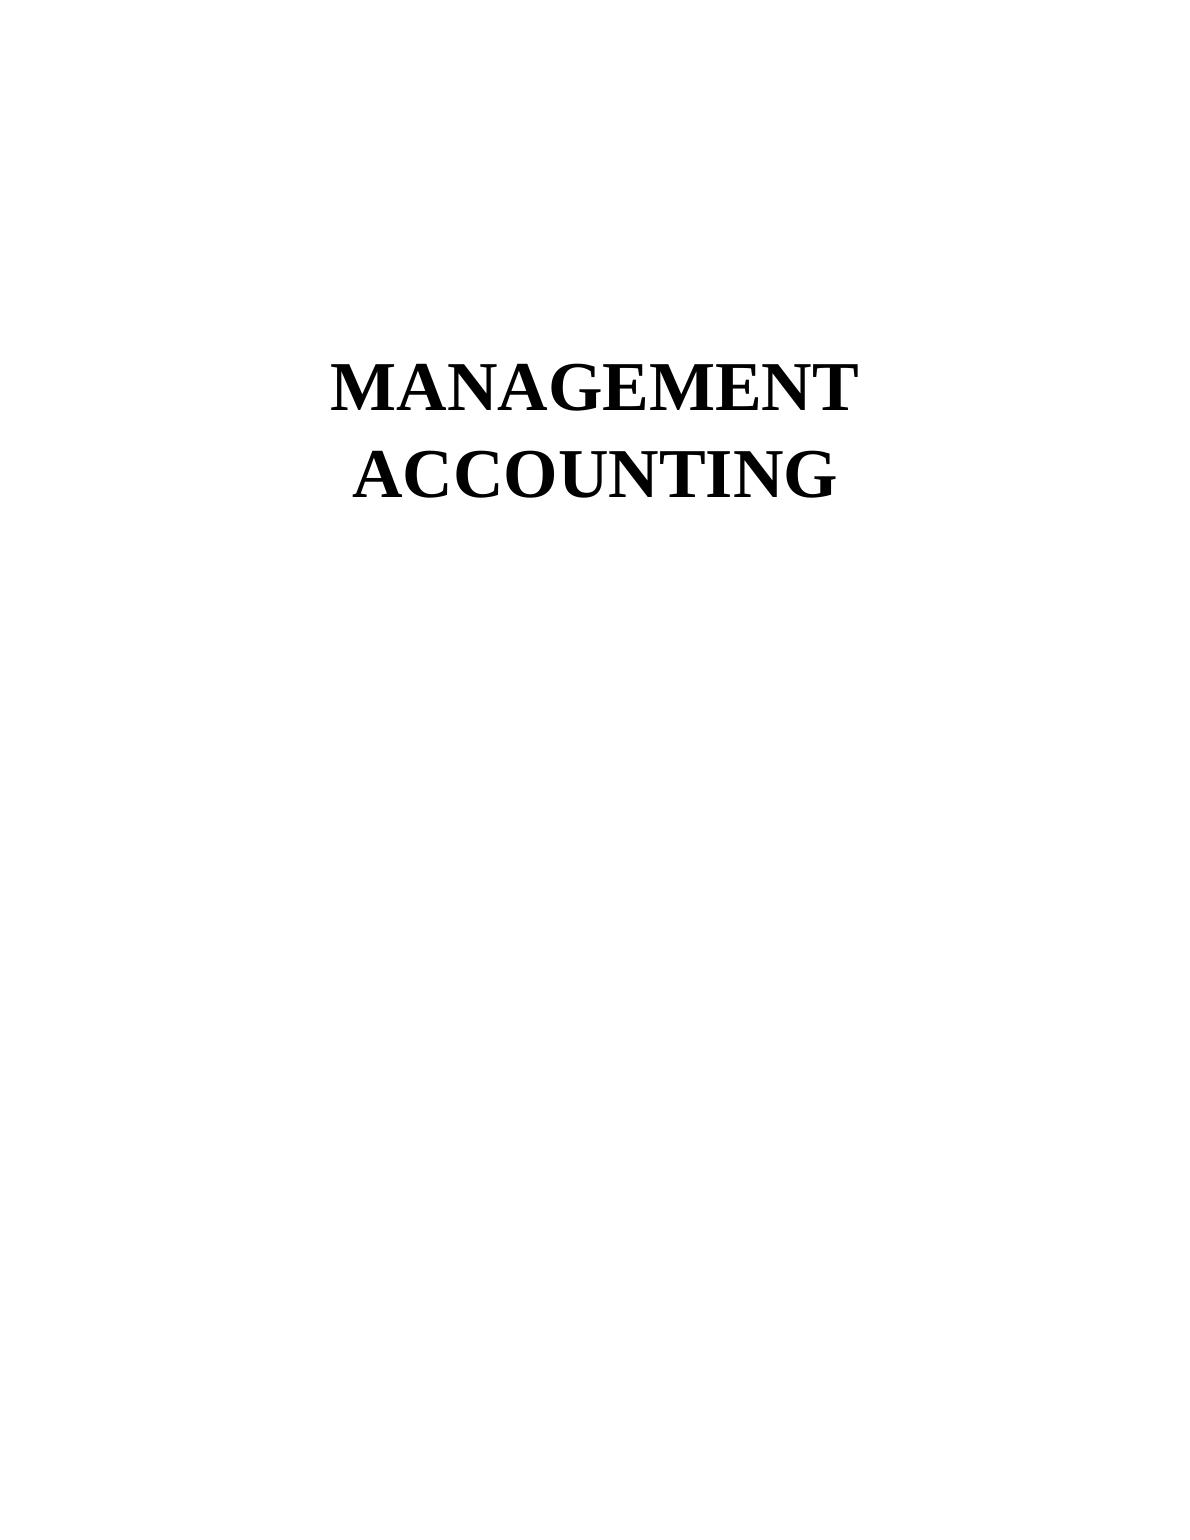 Report on Varied Management Accounting Systems_1